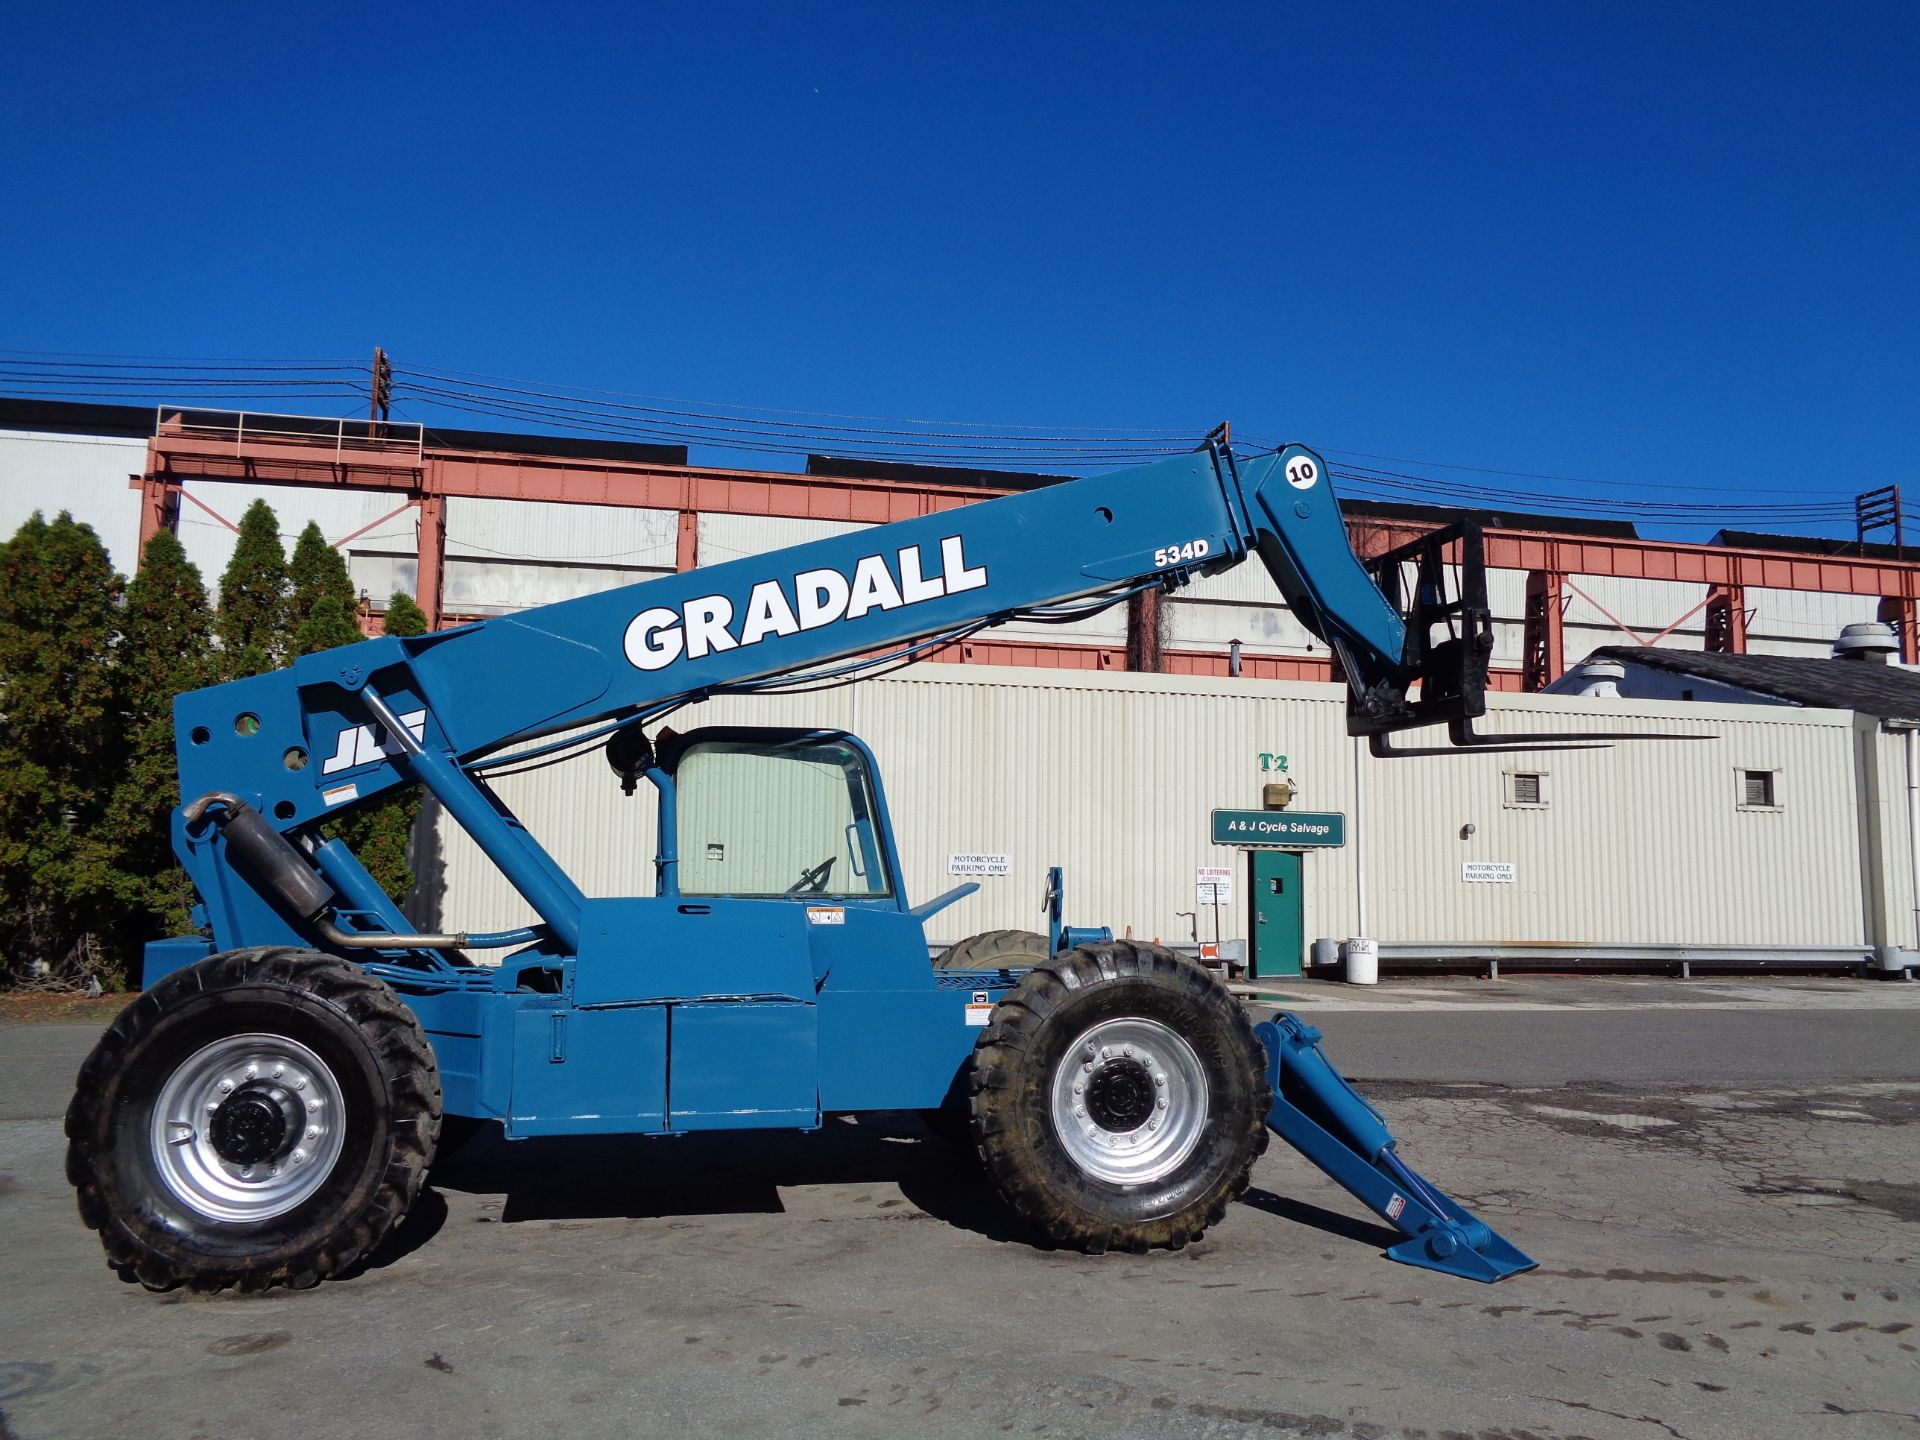 Gradall 534D-10 Telescopic Forklift - 10,000 lbs - Image 5 of 24